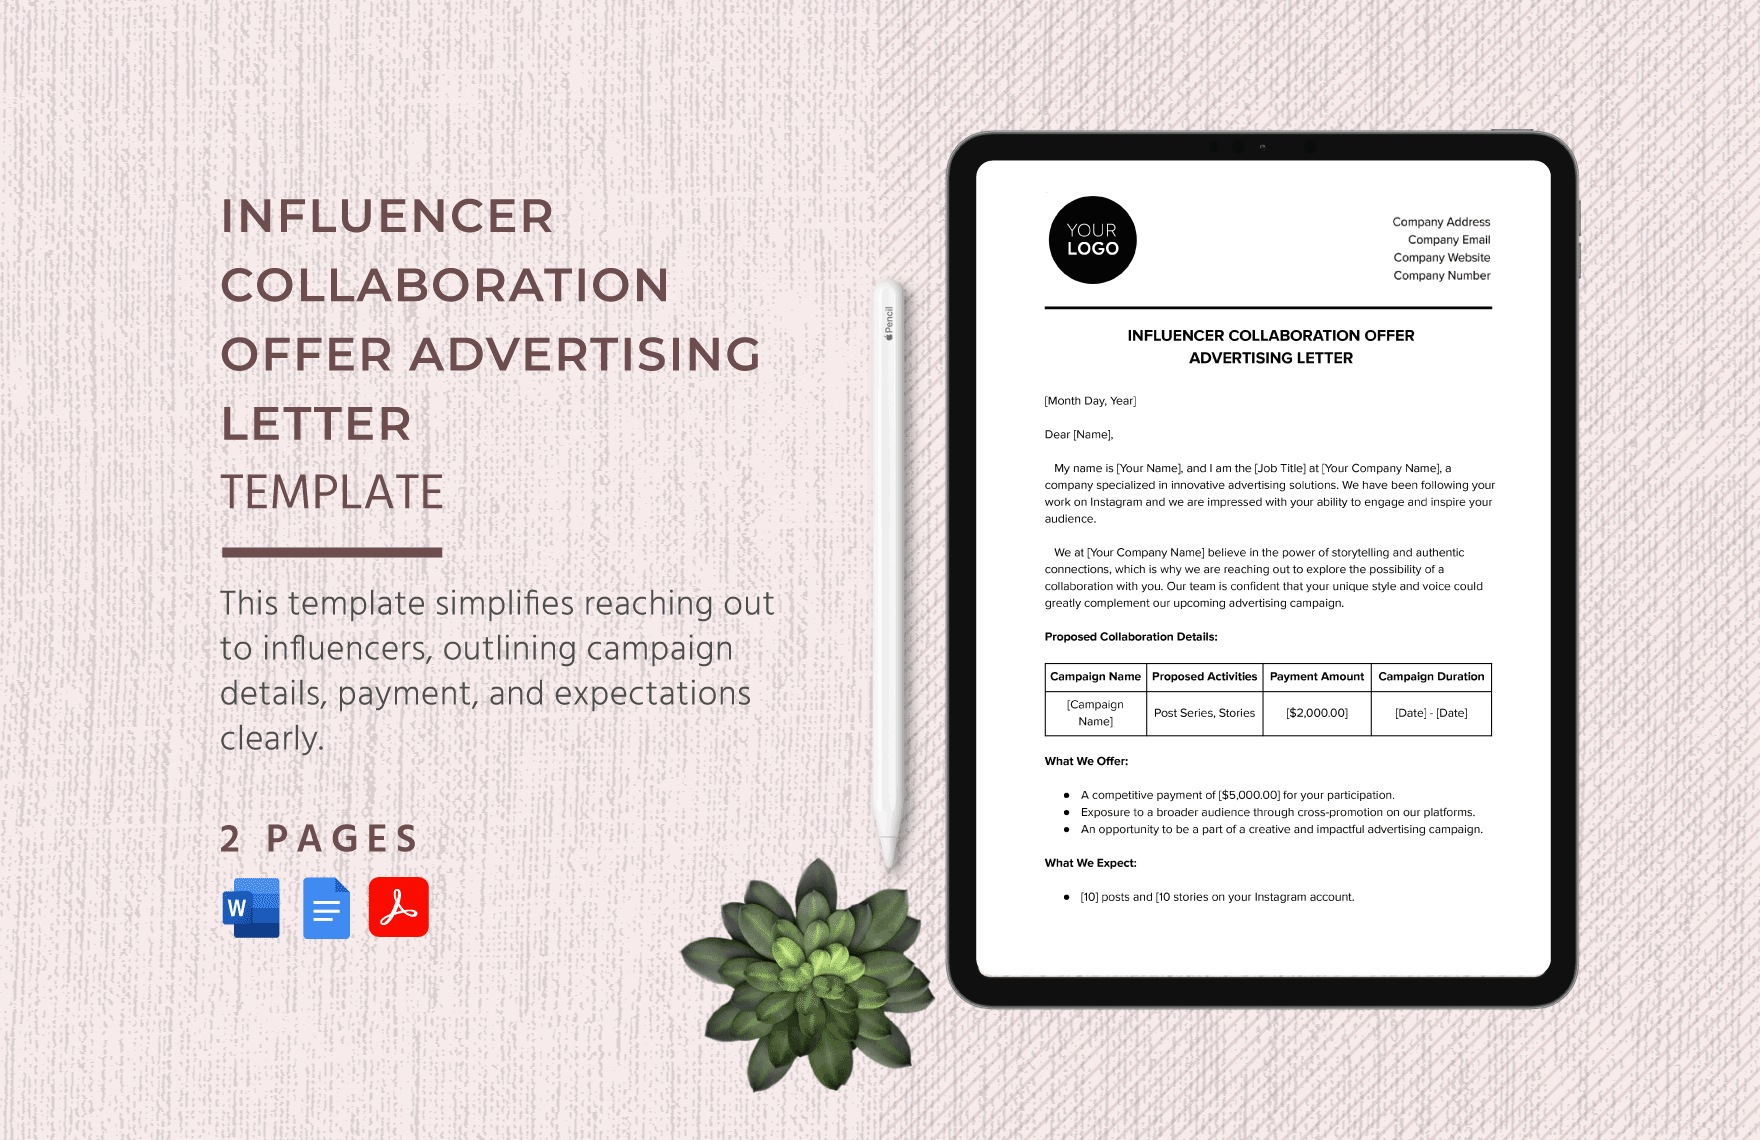 Influencer Collaboration Offer Advertising Letter Template